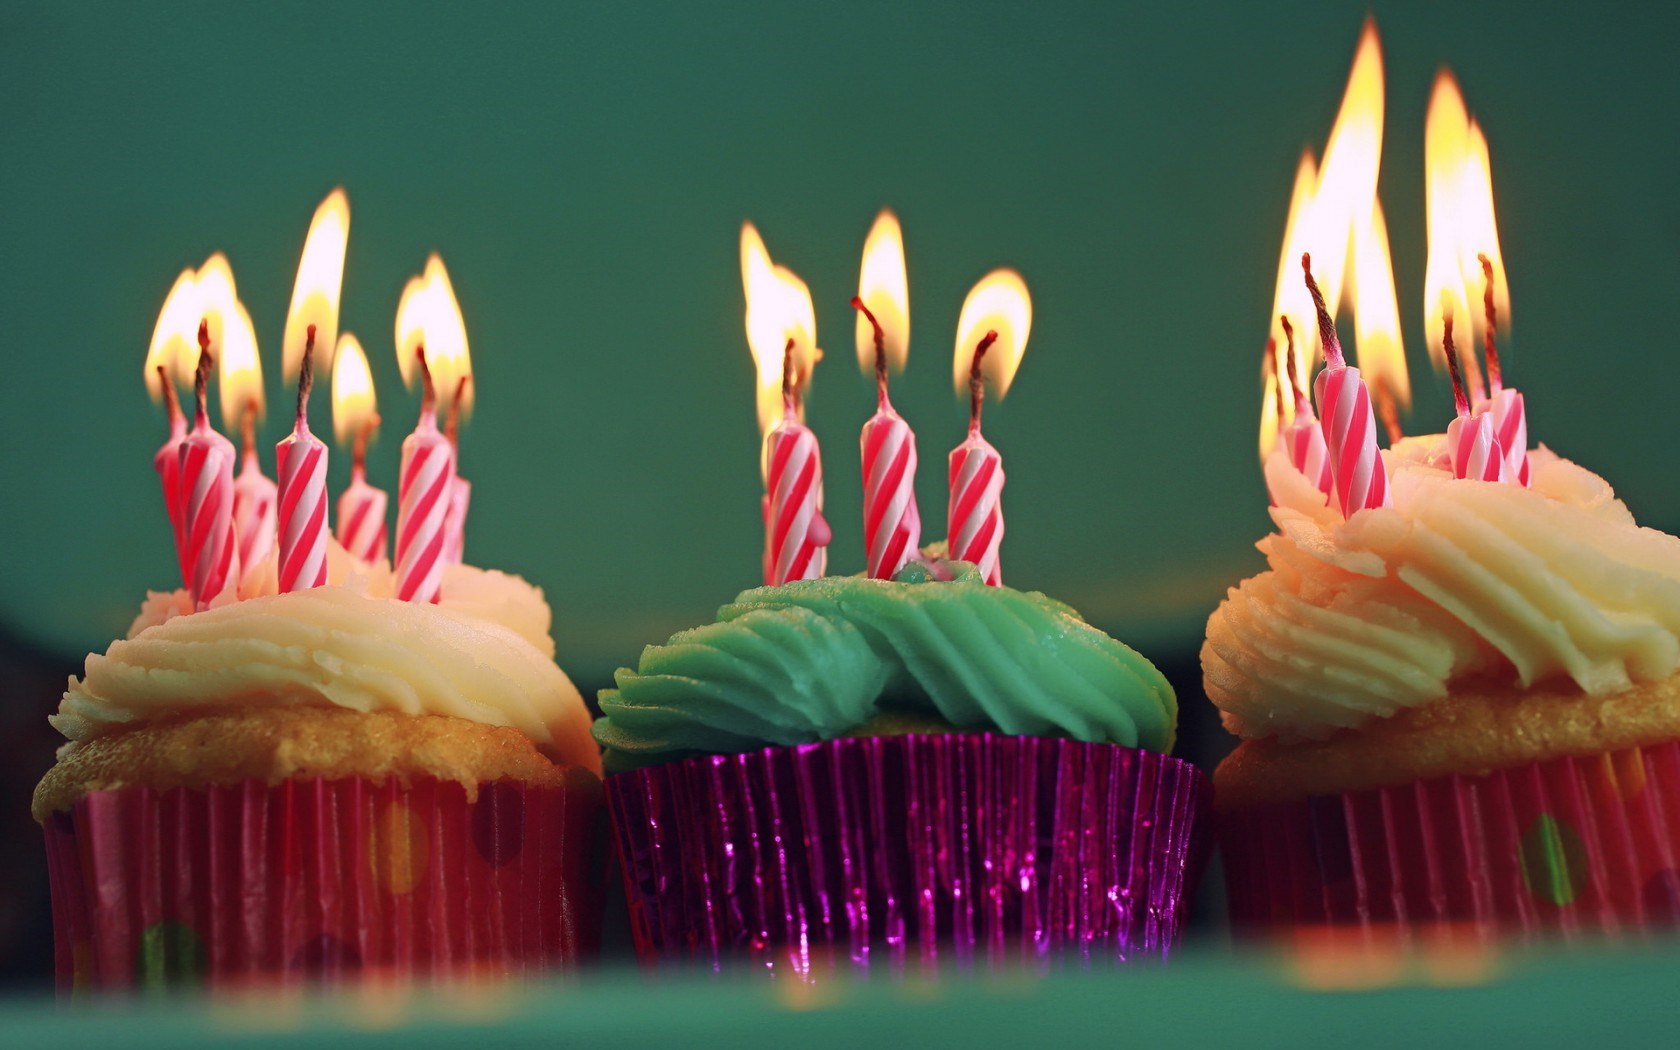 Cupcakes Happy BirtHDay Candles HD Wallpaper